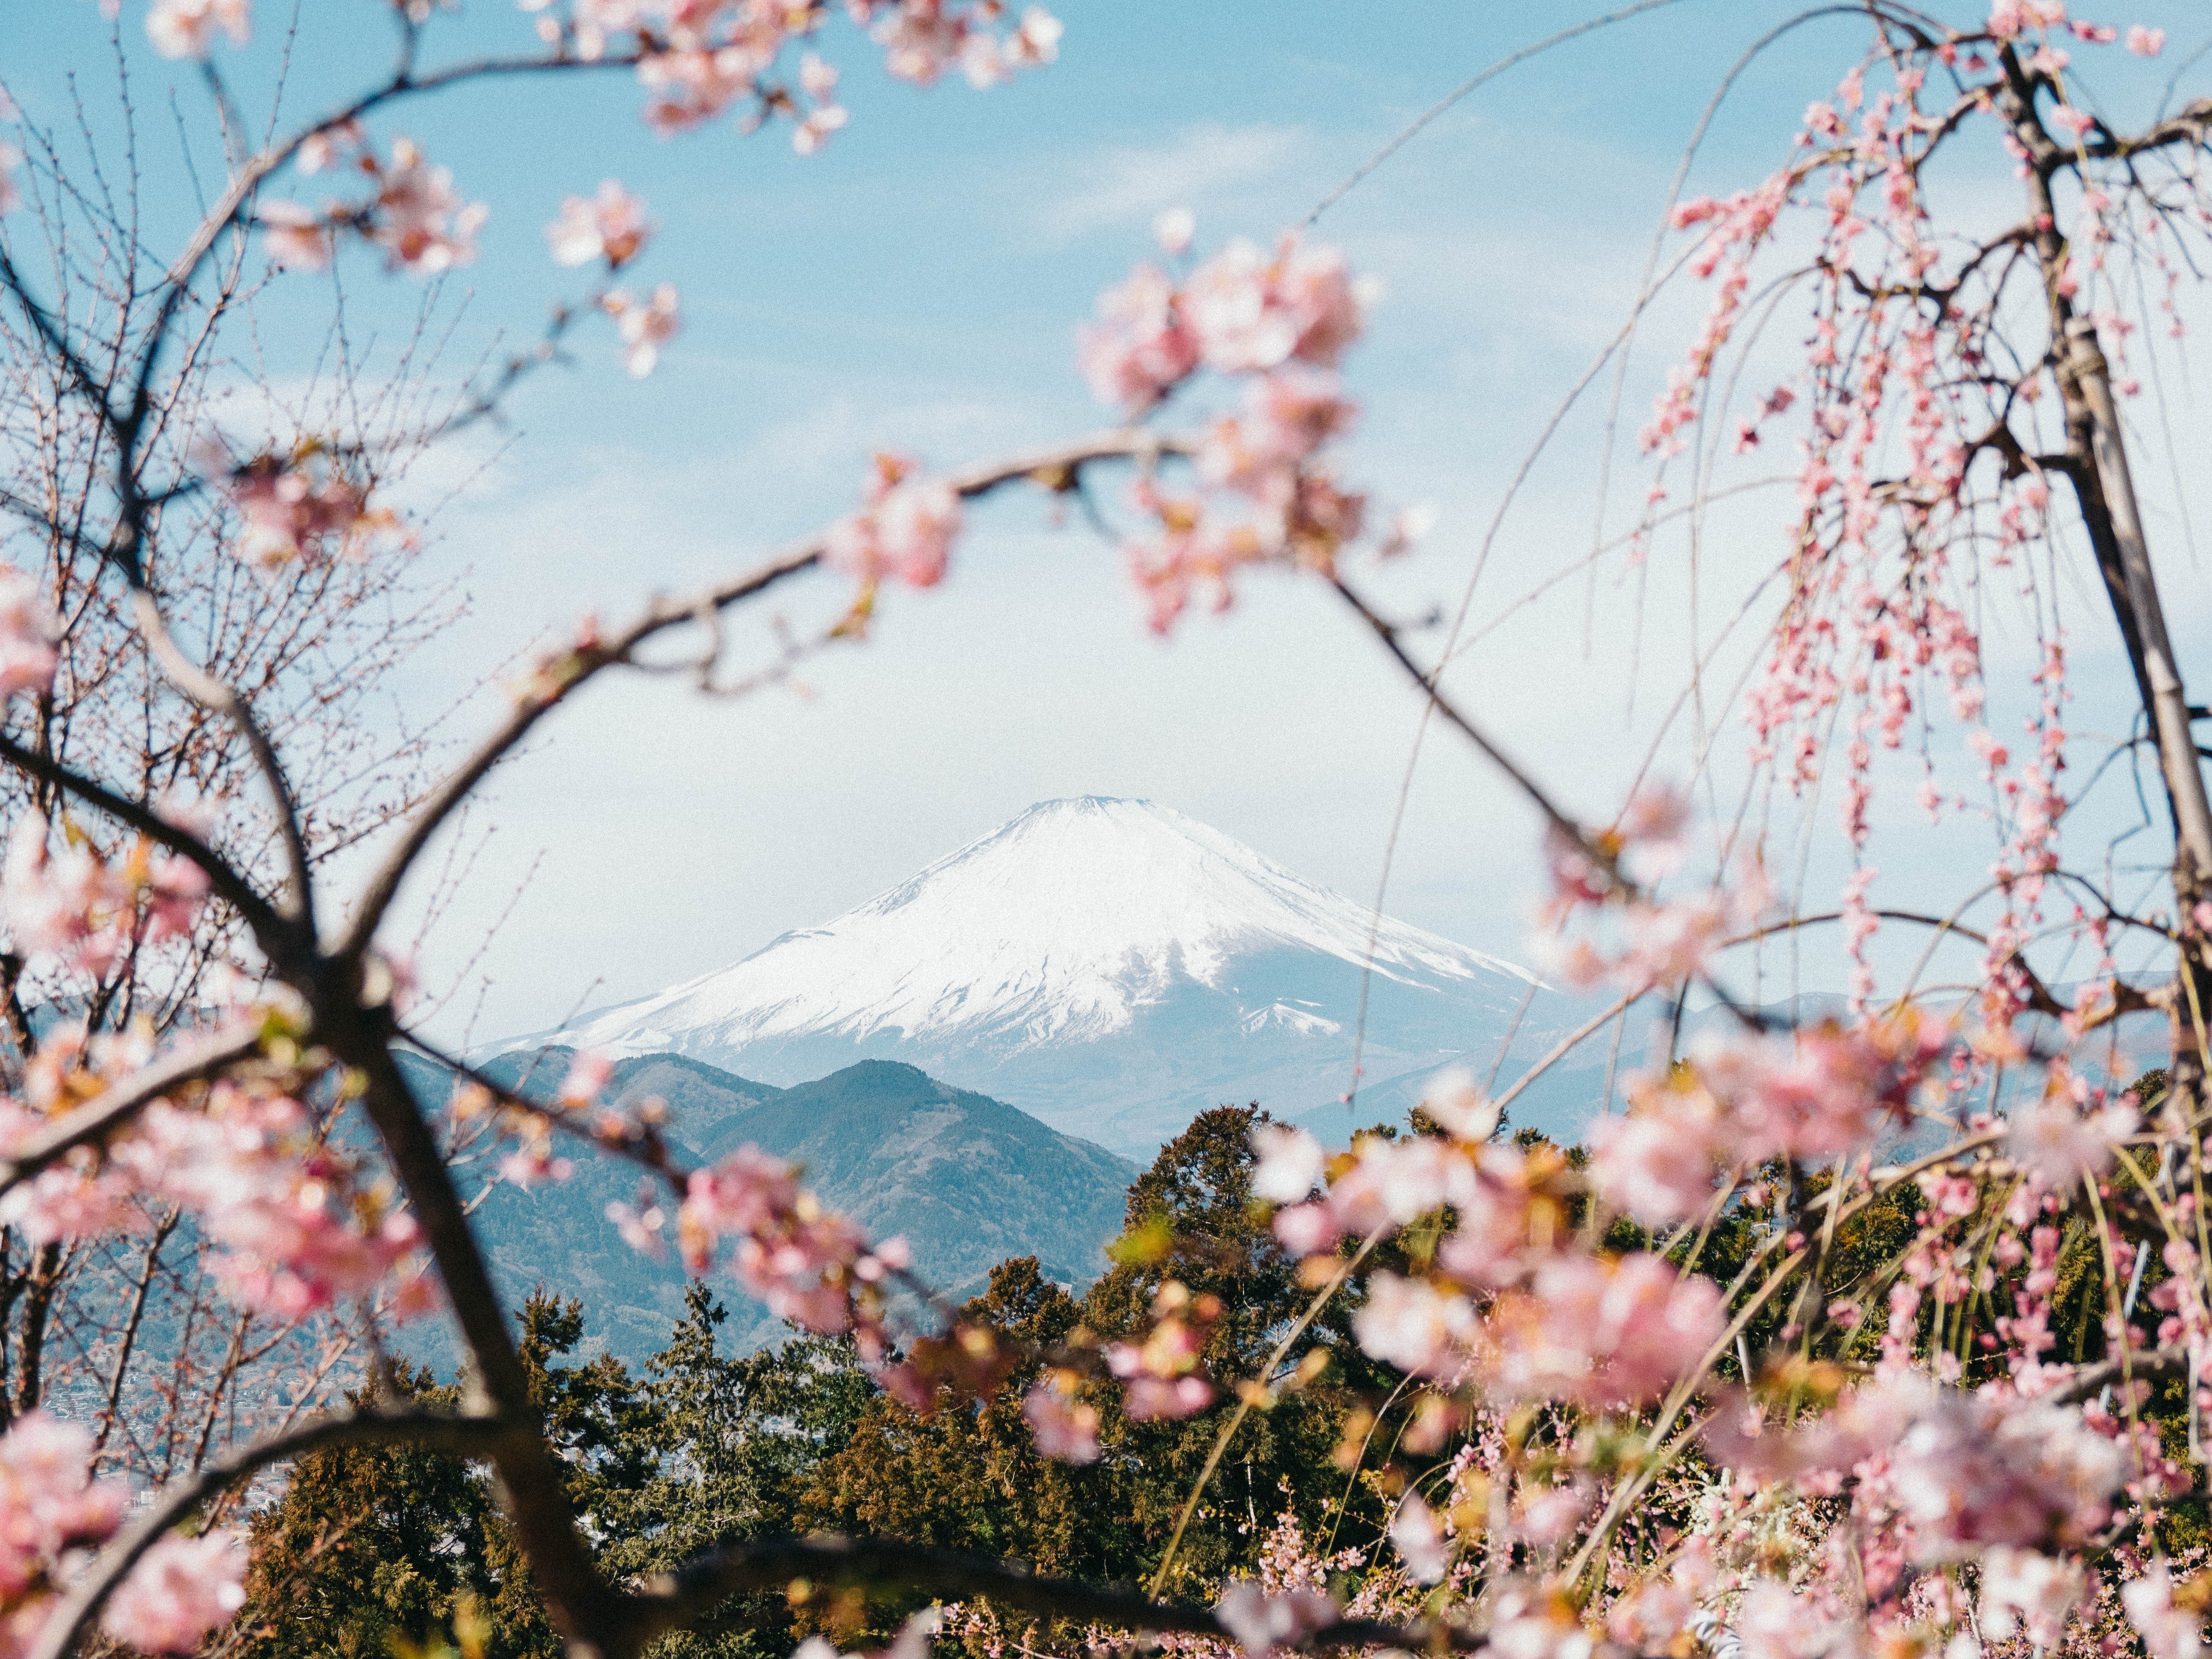 Snow-covered Mt. Fuji in the background with cherry-blossom trees in the foreground